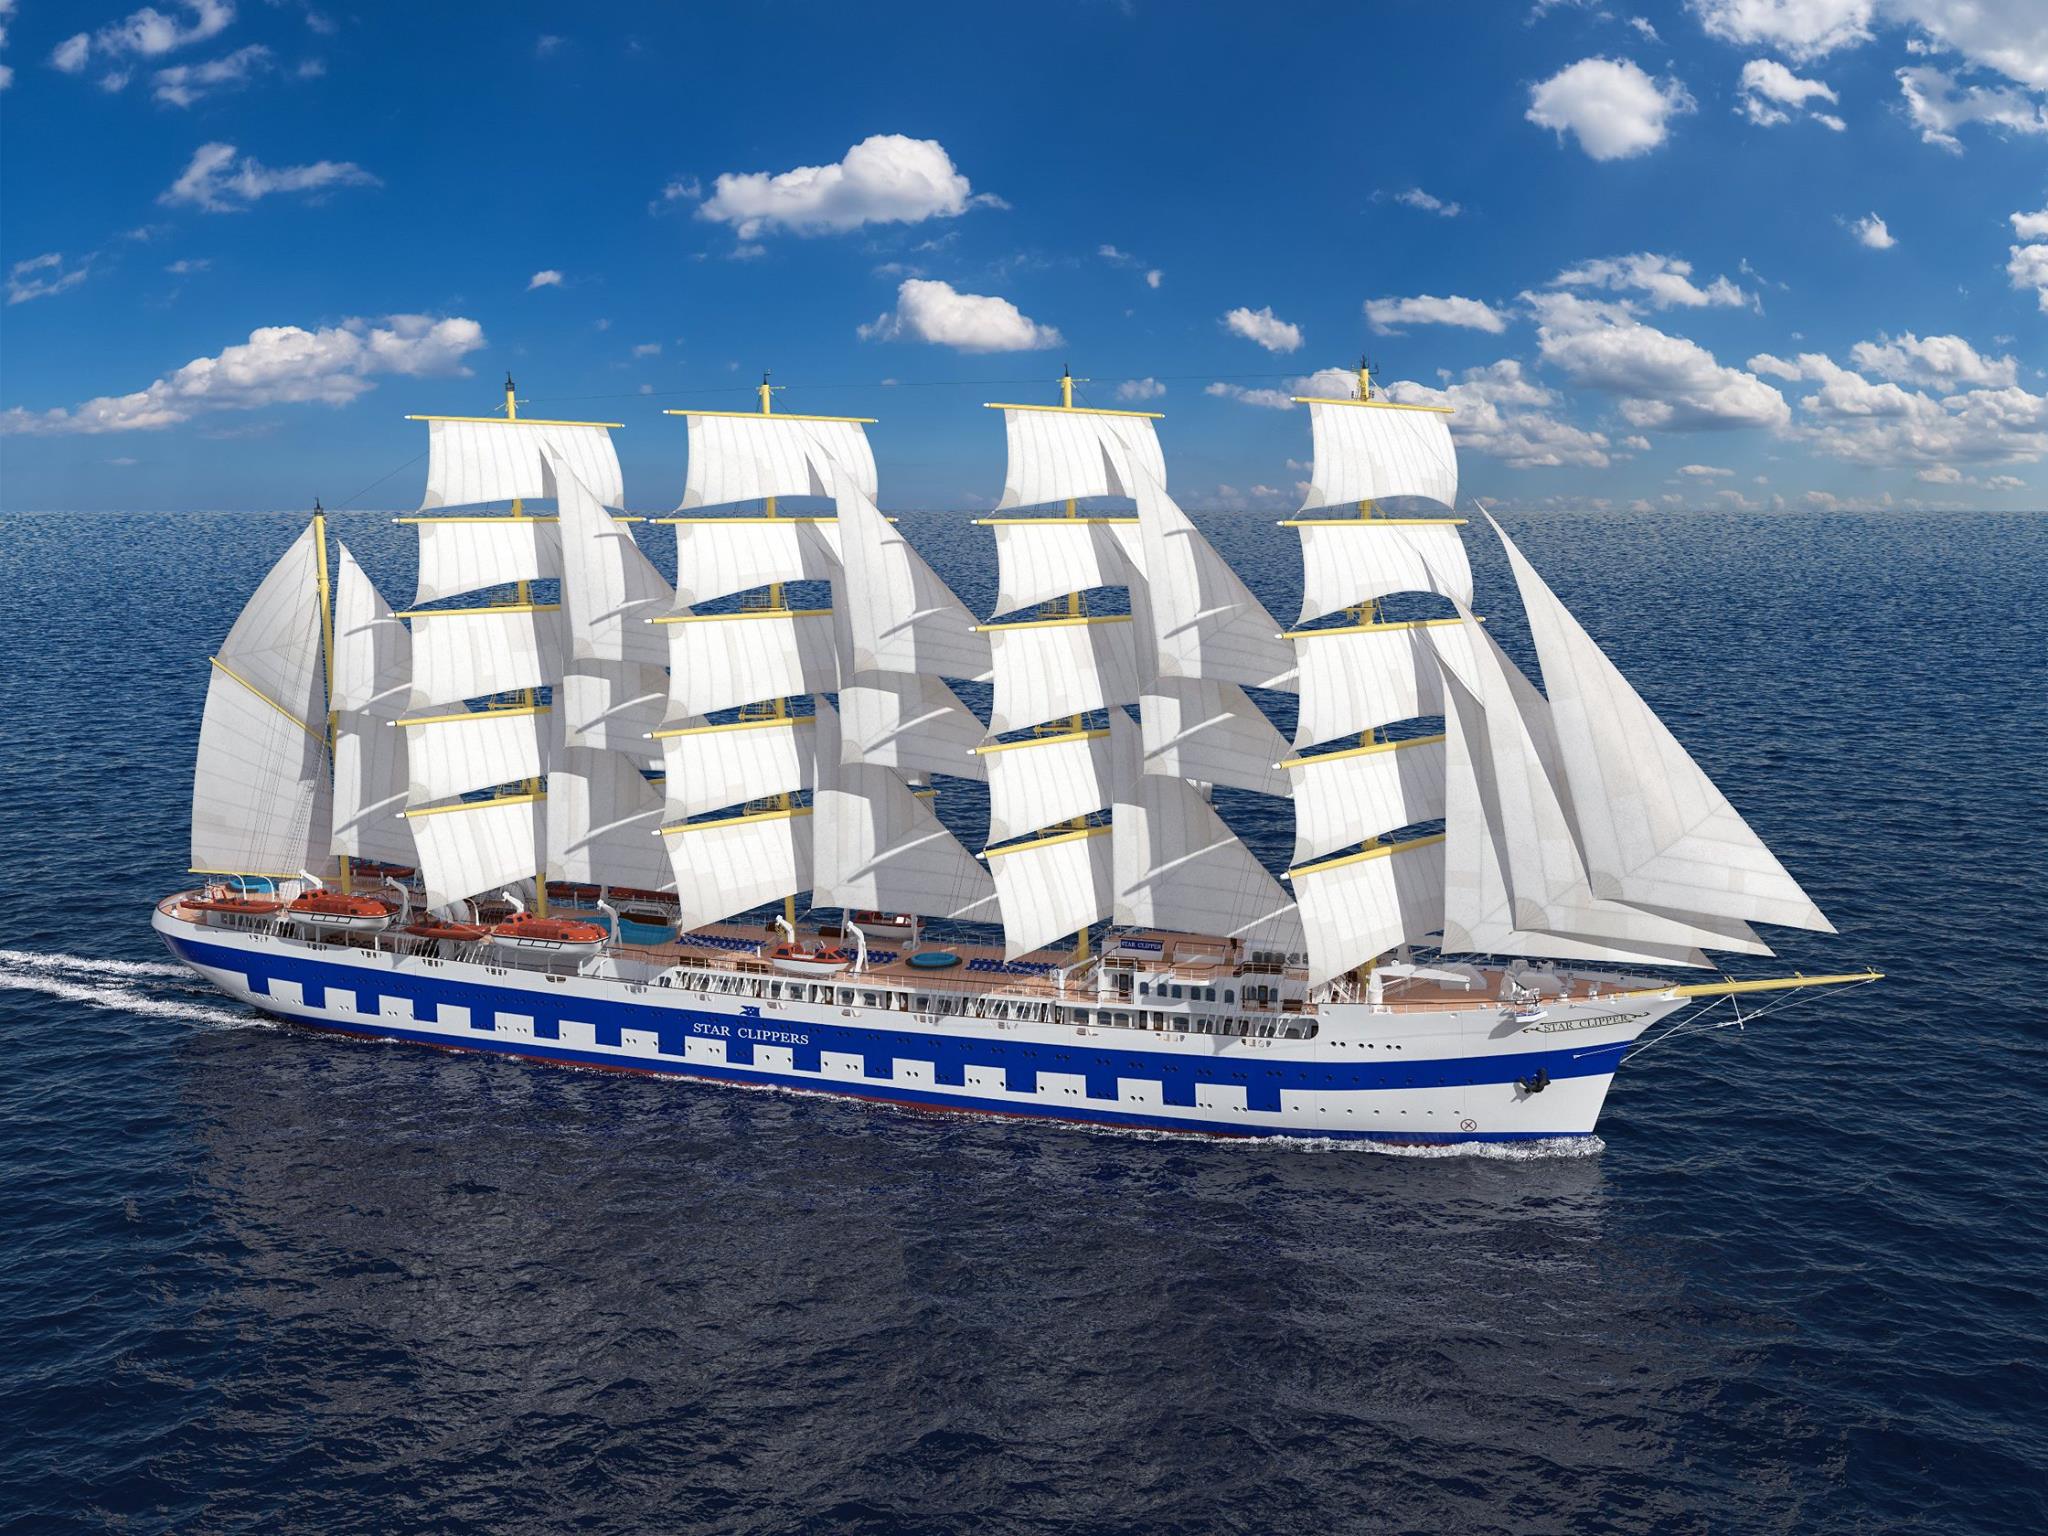 Tall Ship Sailing Cruise Line Recreates Largest Ship of its Kind